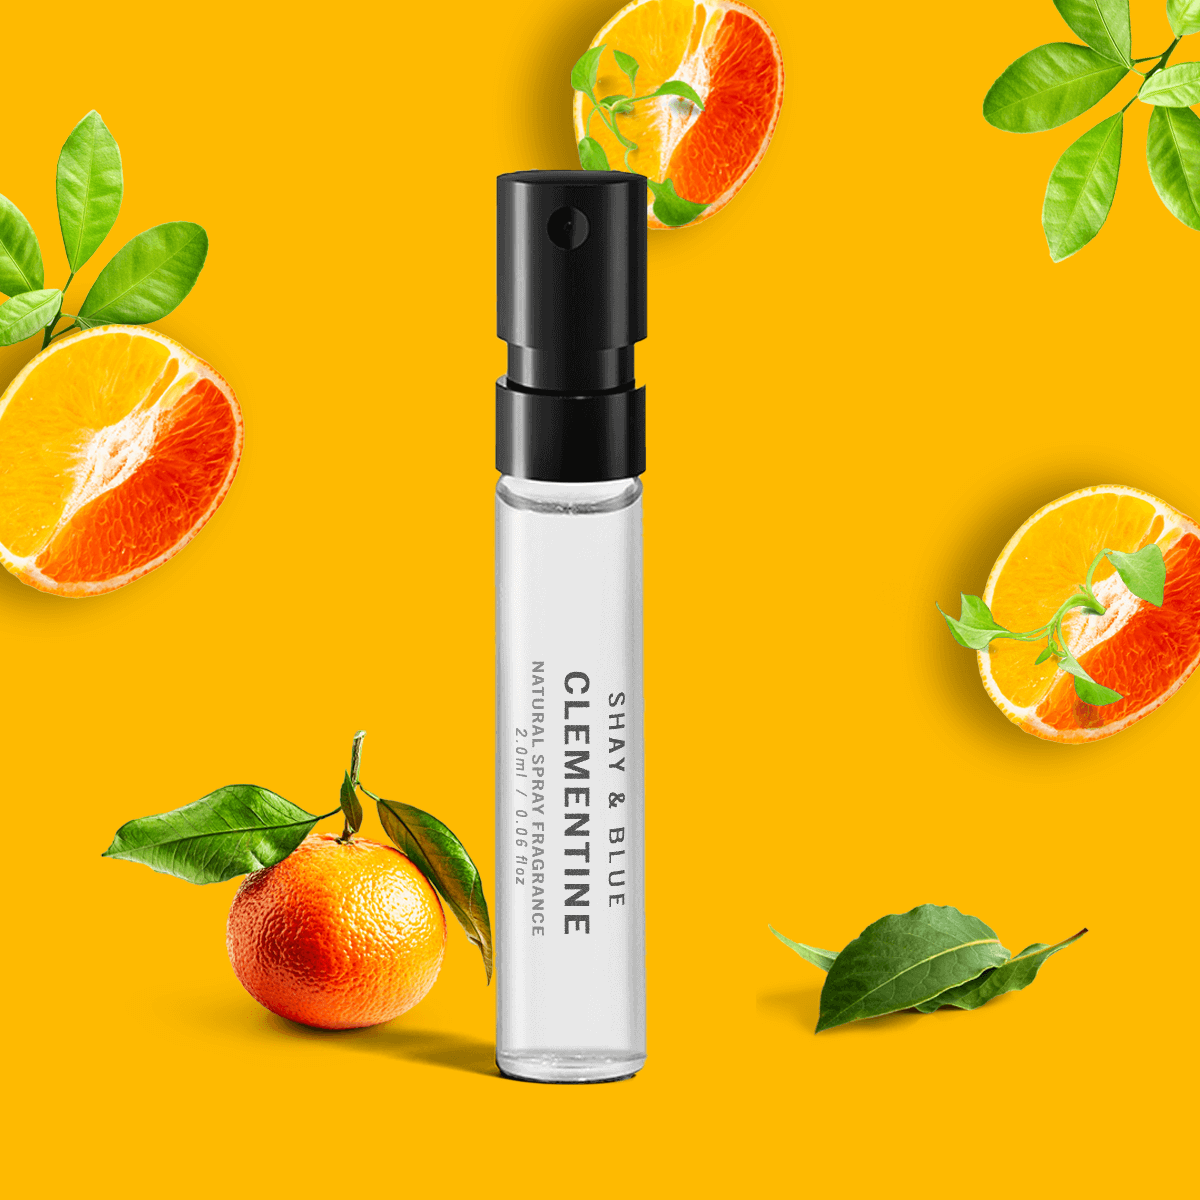 Clementine Fragrance 2ml | Flirty clementine with a bitter freshness of petitgrain and deep laurel woods. | Clean All Gender Fragrance | Shay & Blue